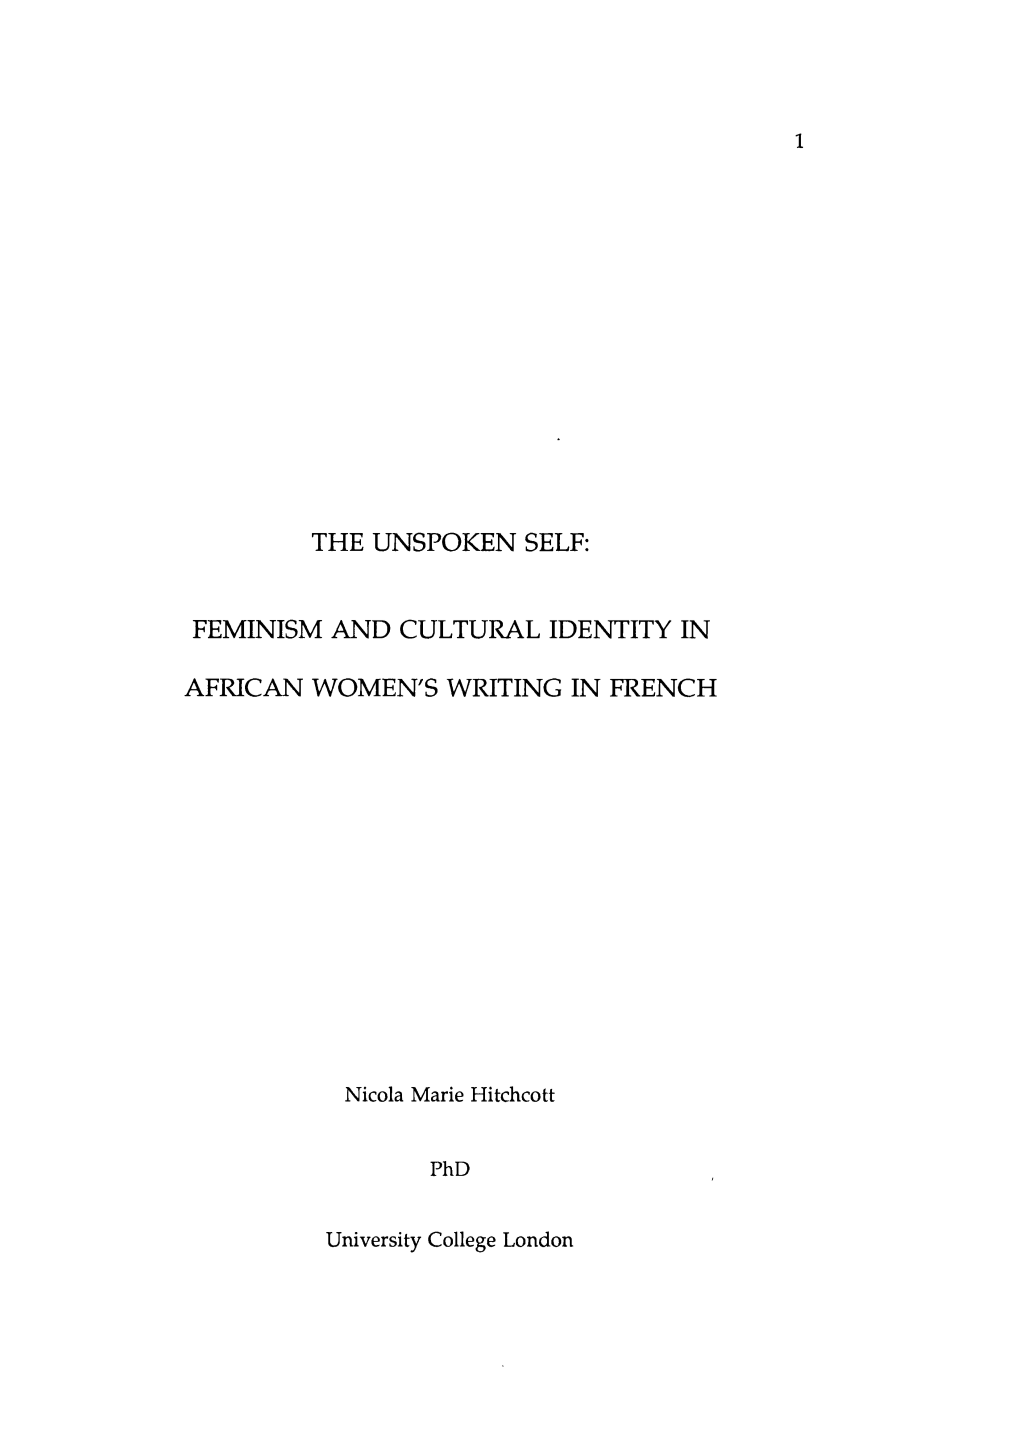 The Unspoken Self: Feminism and Cultural Identity in African Women's